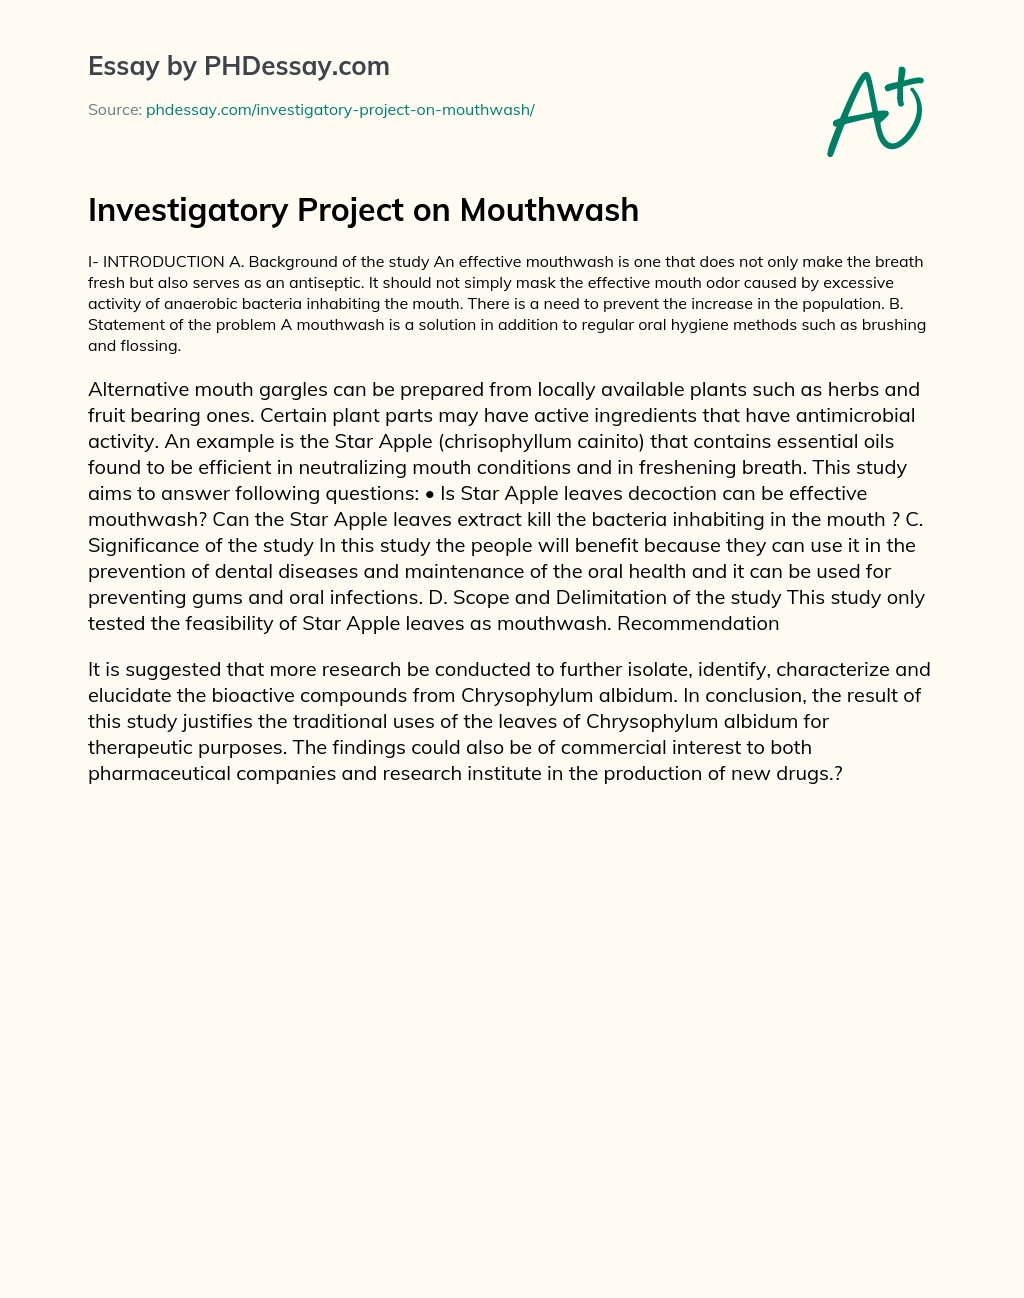 Investigatory Project on Mouthwash essay